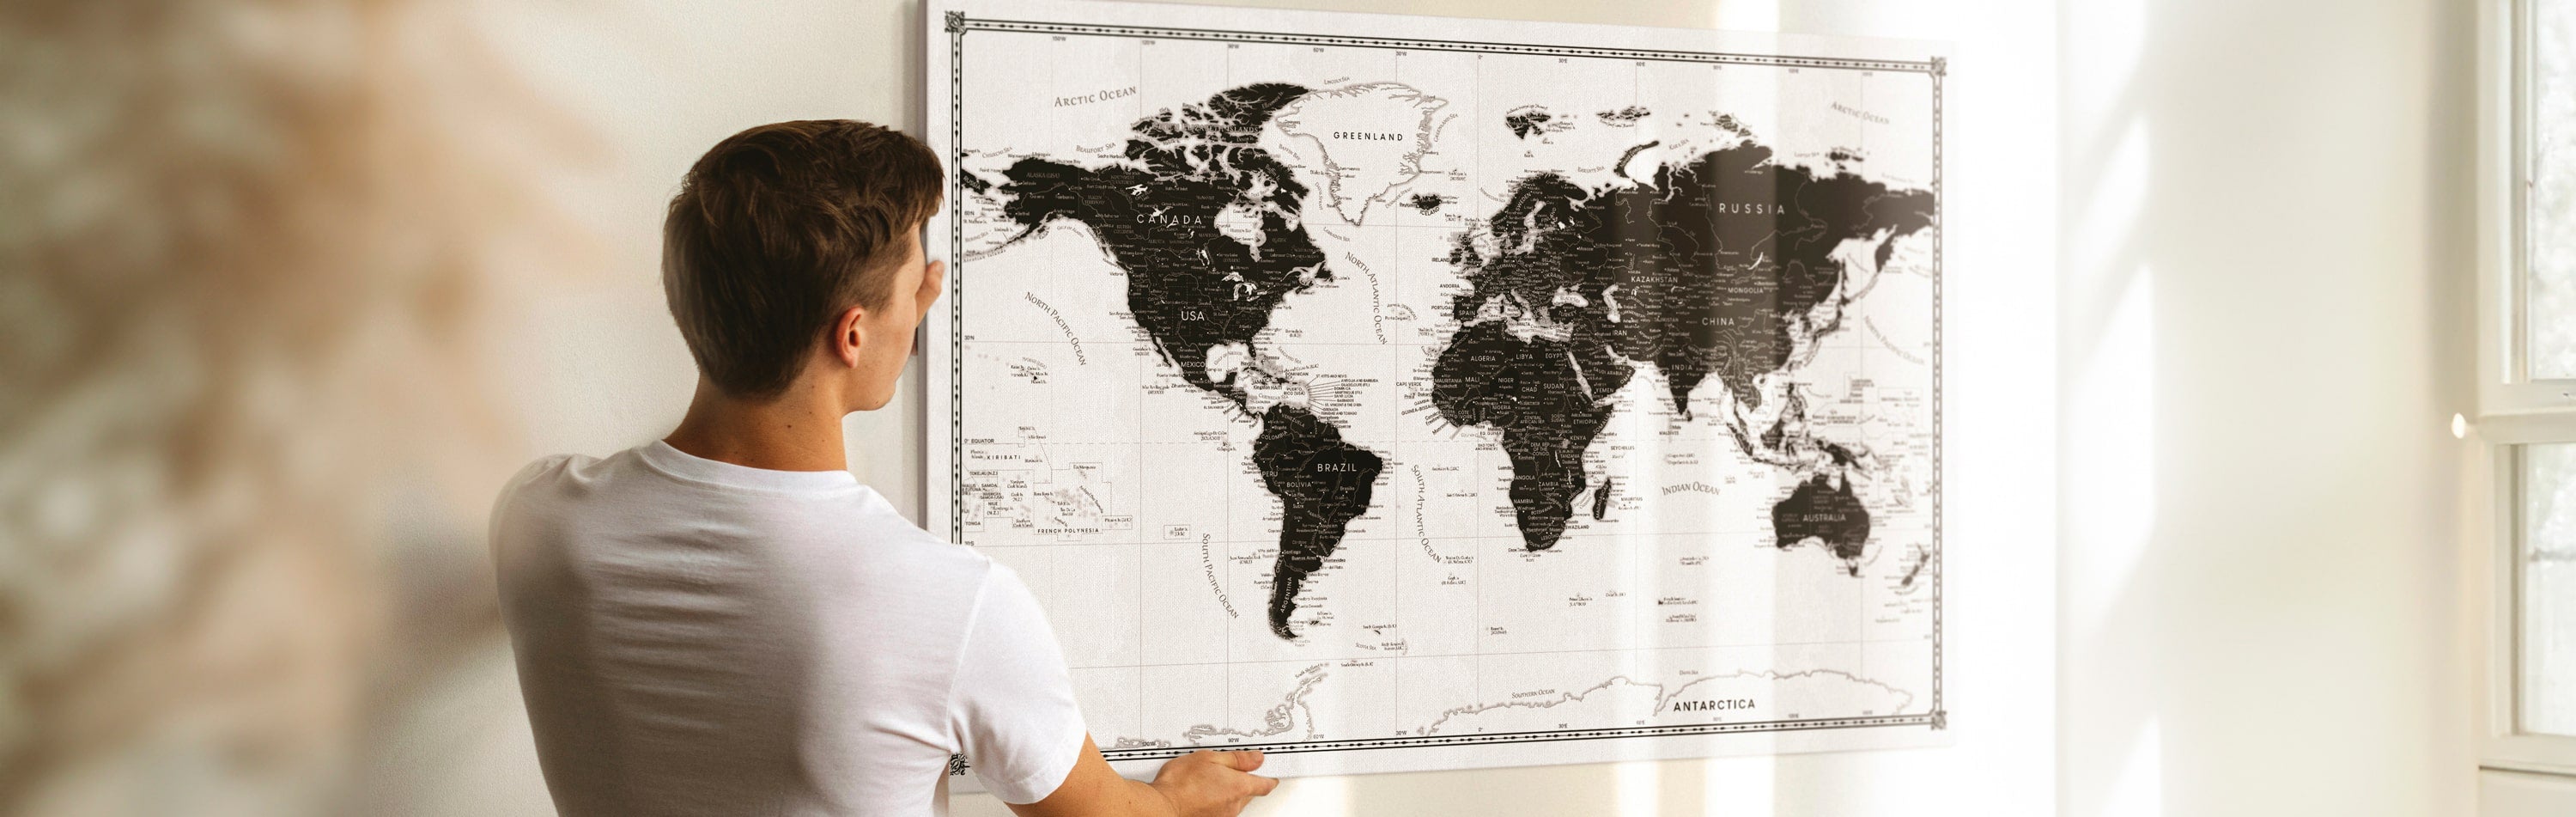 A man contemplating a black and white world map pin board on a wall, highlighting destinations using golden push pins - an elegant world map wall art for travelers, available on canvas, perfect for tracking and planning global journeys.